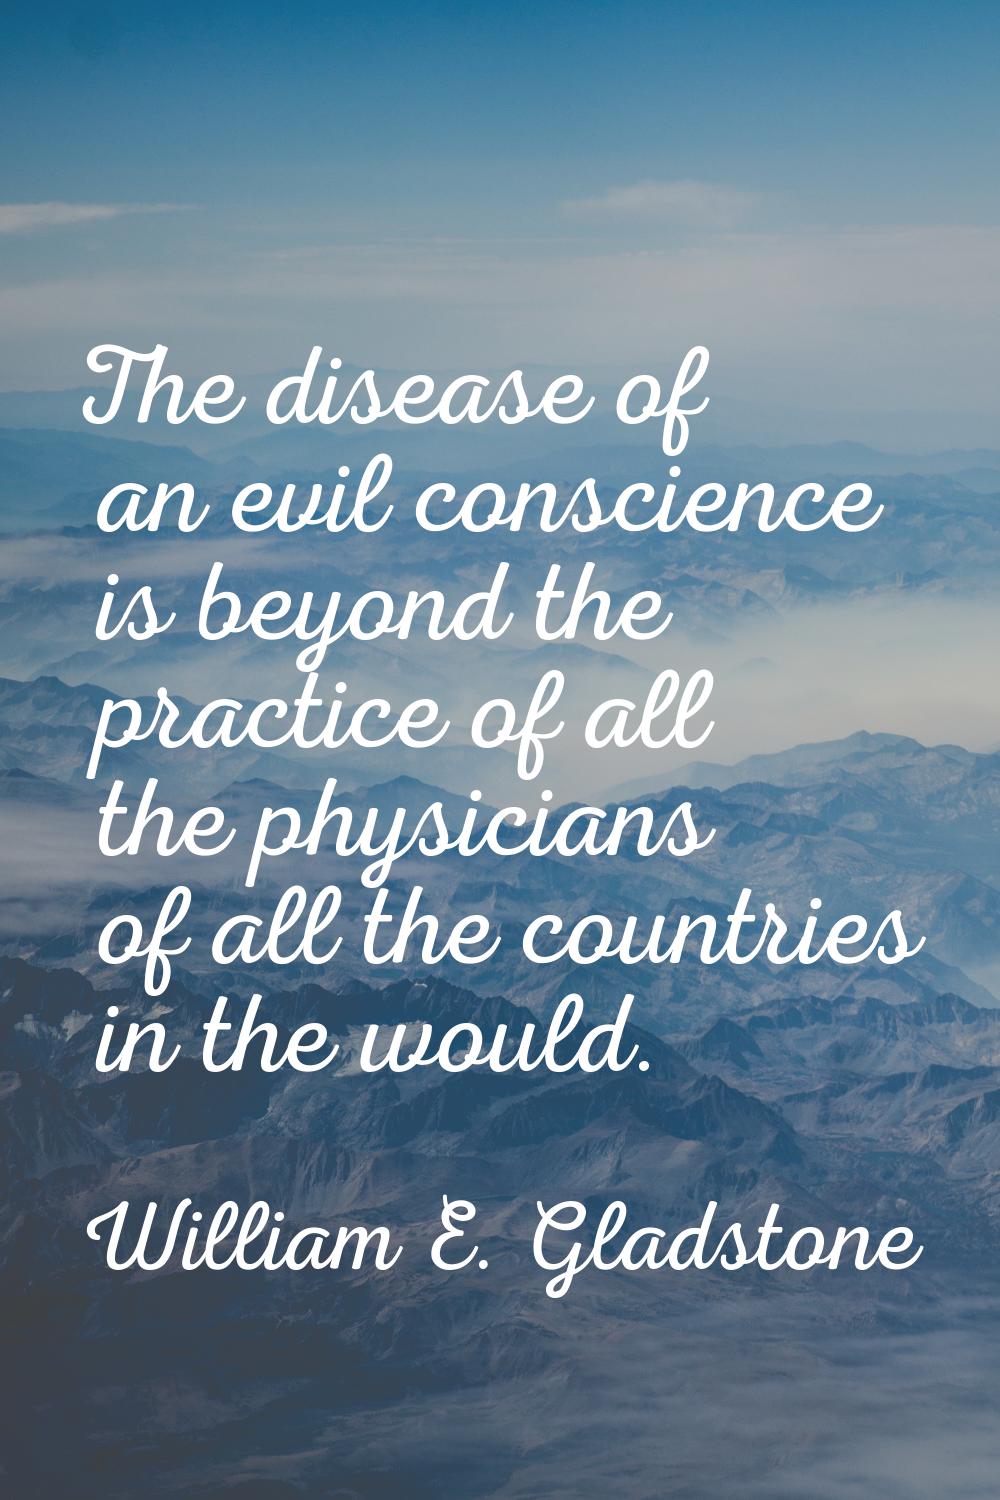 The disease of an evil conscience is beyond the practice of all the physicians of all the countries